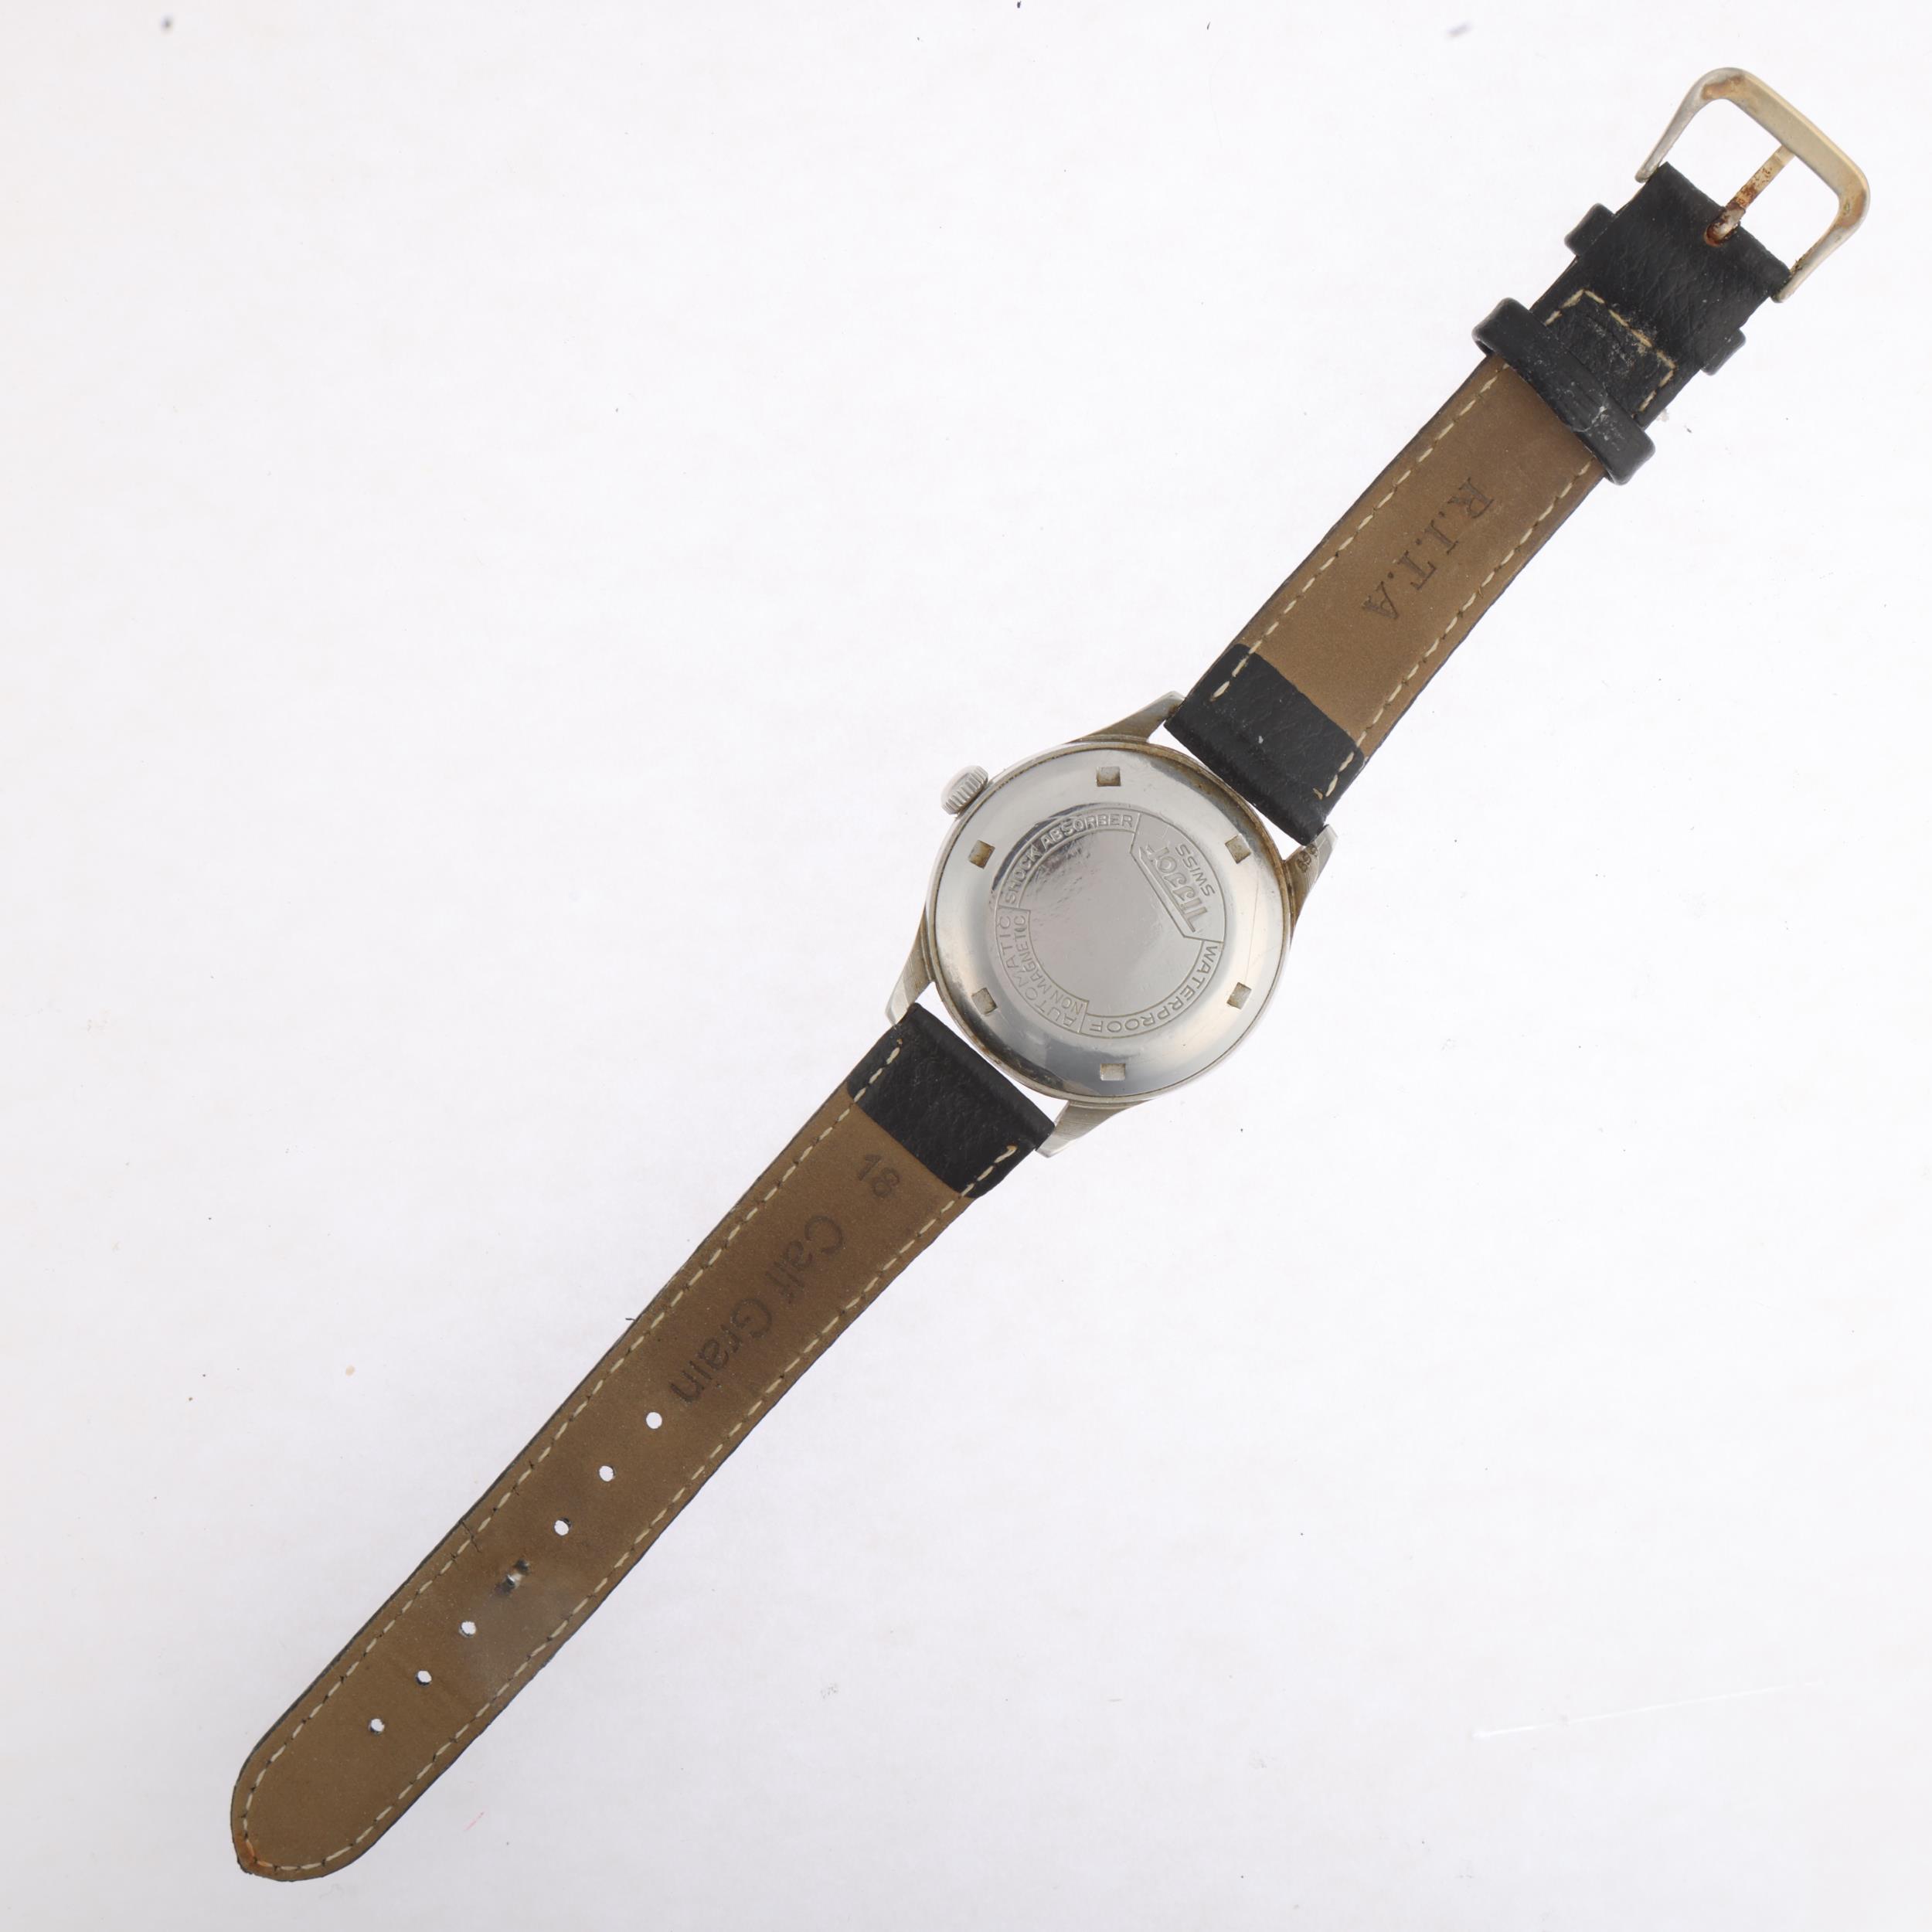 TISSOT - a Vintage stainless steel 'Bumper' automatic wristwatch, ref. 6541-1, circa 1948, - Image 3 of 5